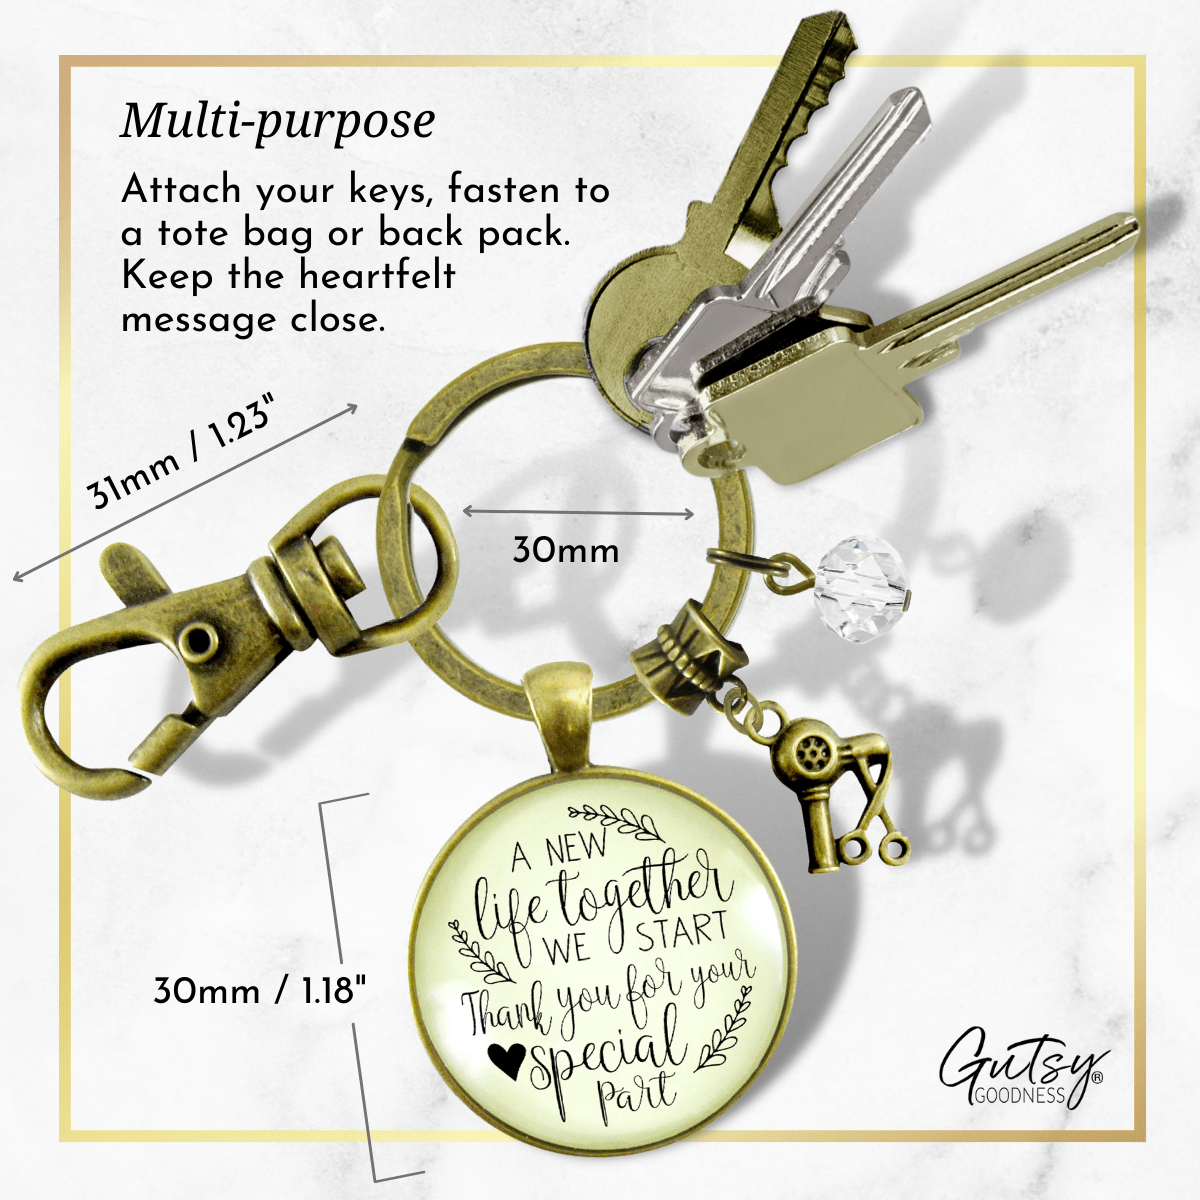 Hairdresser Gift Keychain A New Life We Start Rustic For Stylist Thank You - Gutsy Goodness Handmade Jewelry;Hairdresser Gift Keychain A New Life We Start Rustic For Stylist Thank You - Gutsy Goodness Handmade Jewelry Gifts